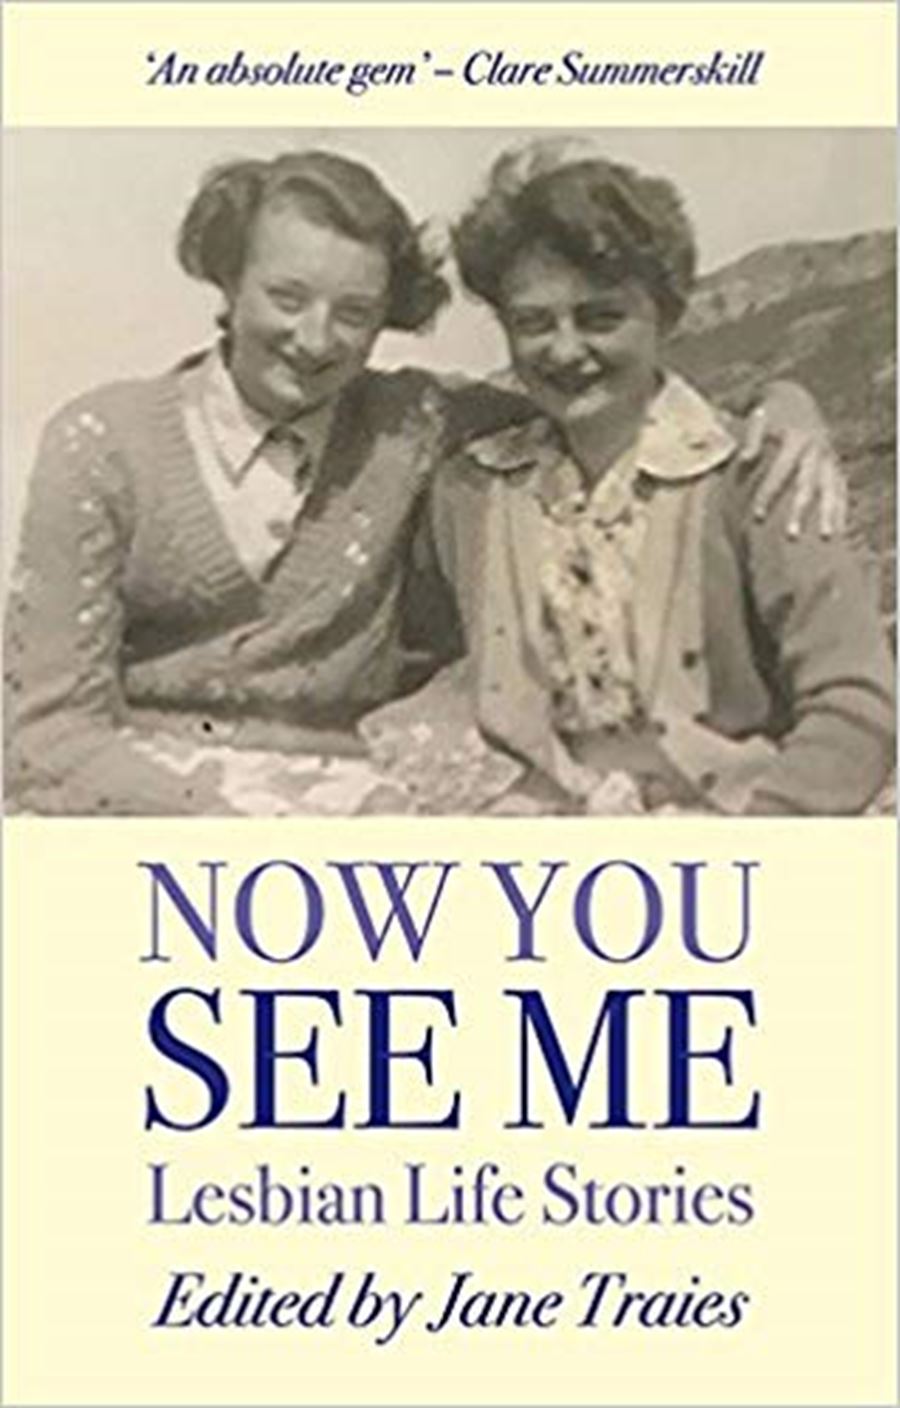 Dr Jane Traies: 'Now You See Me'